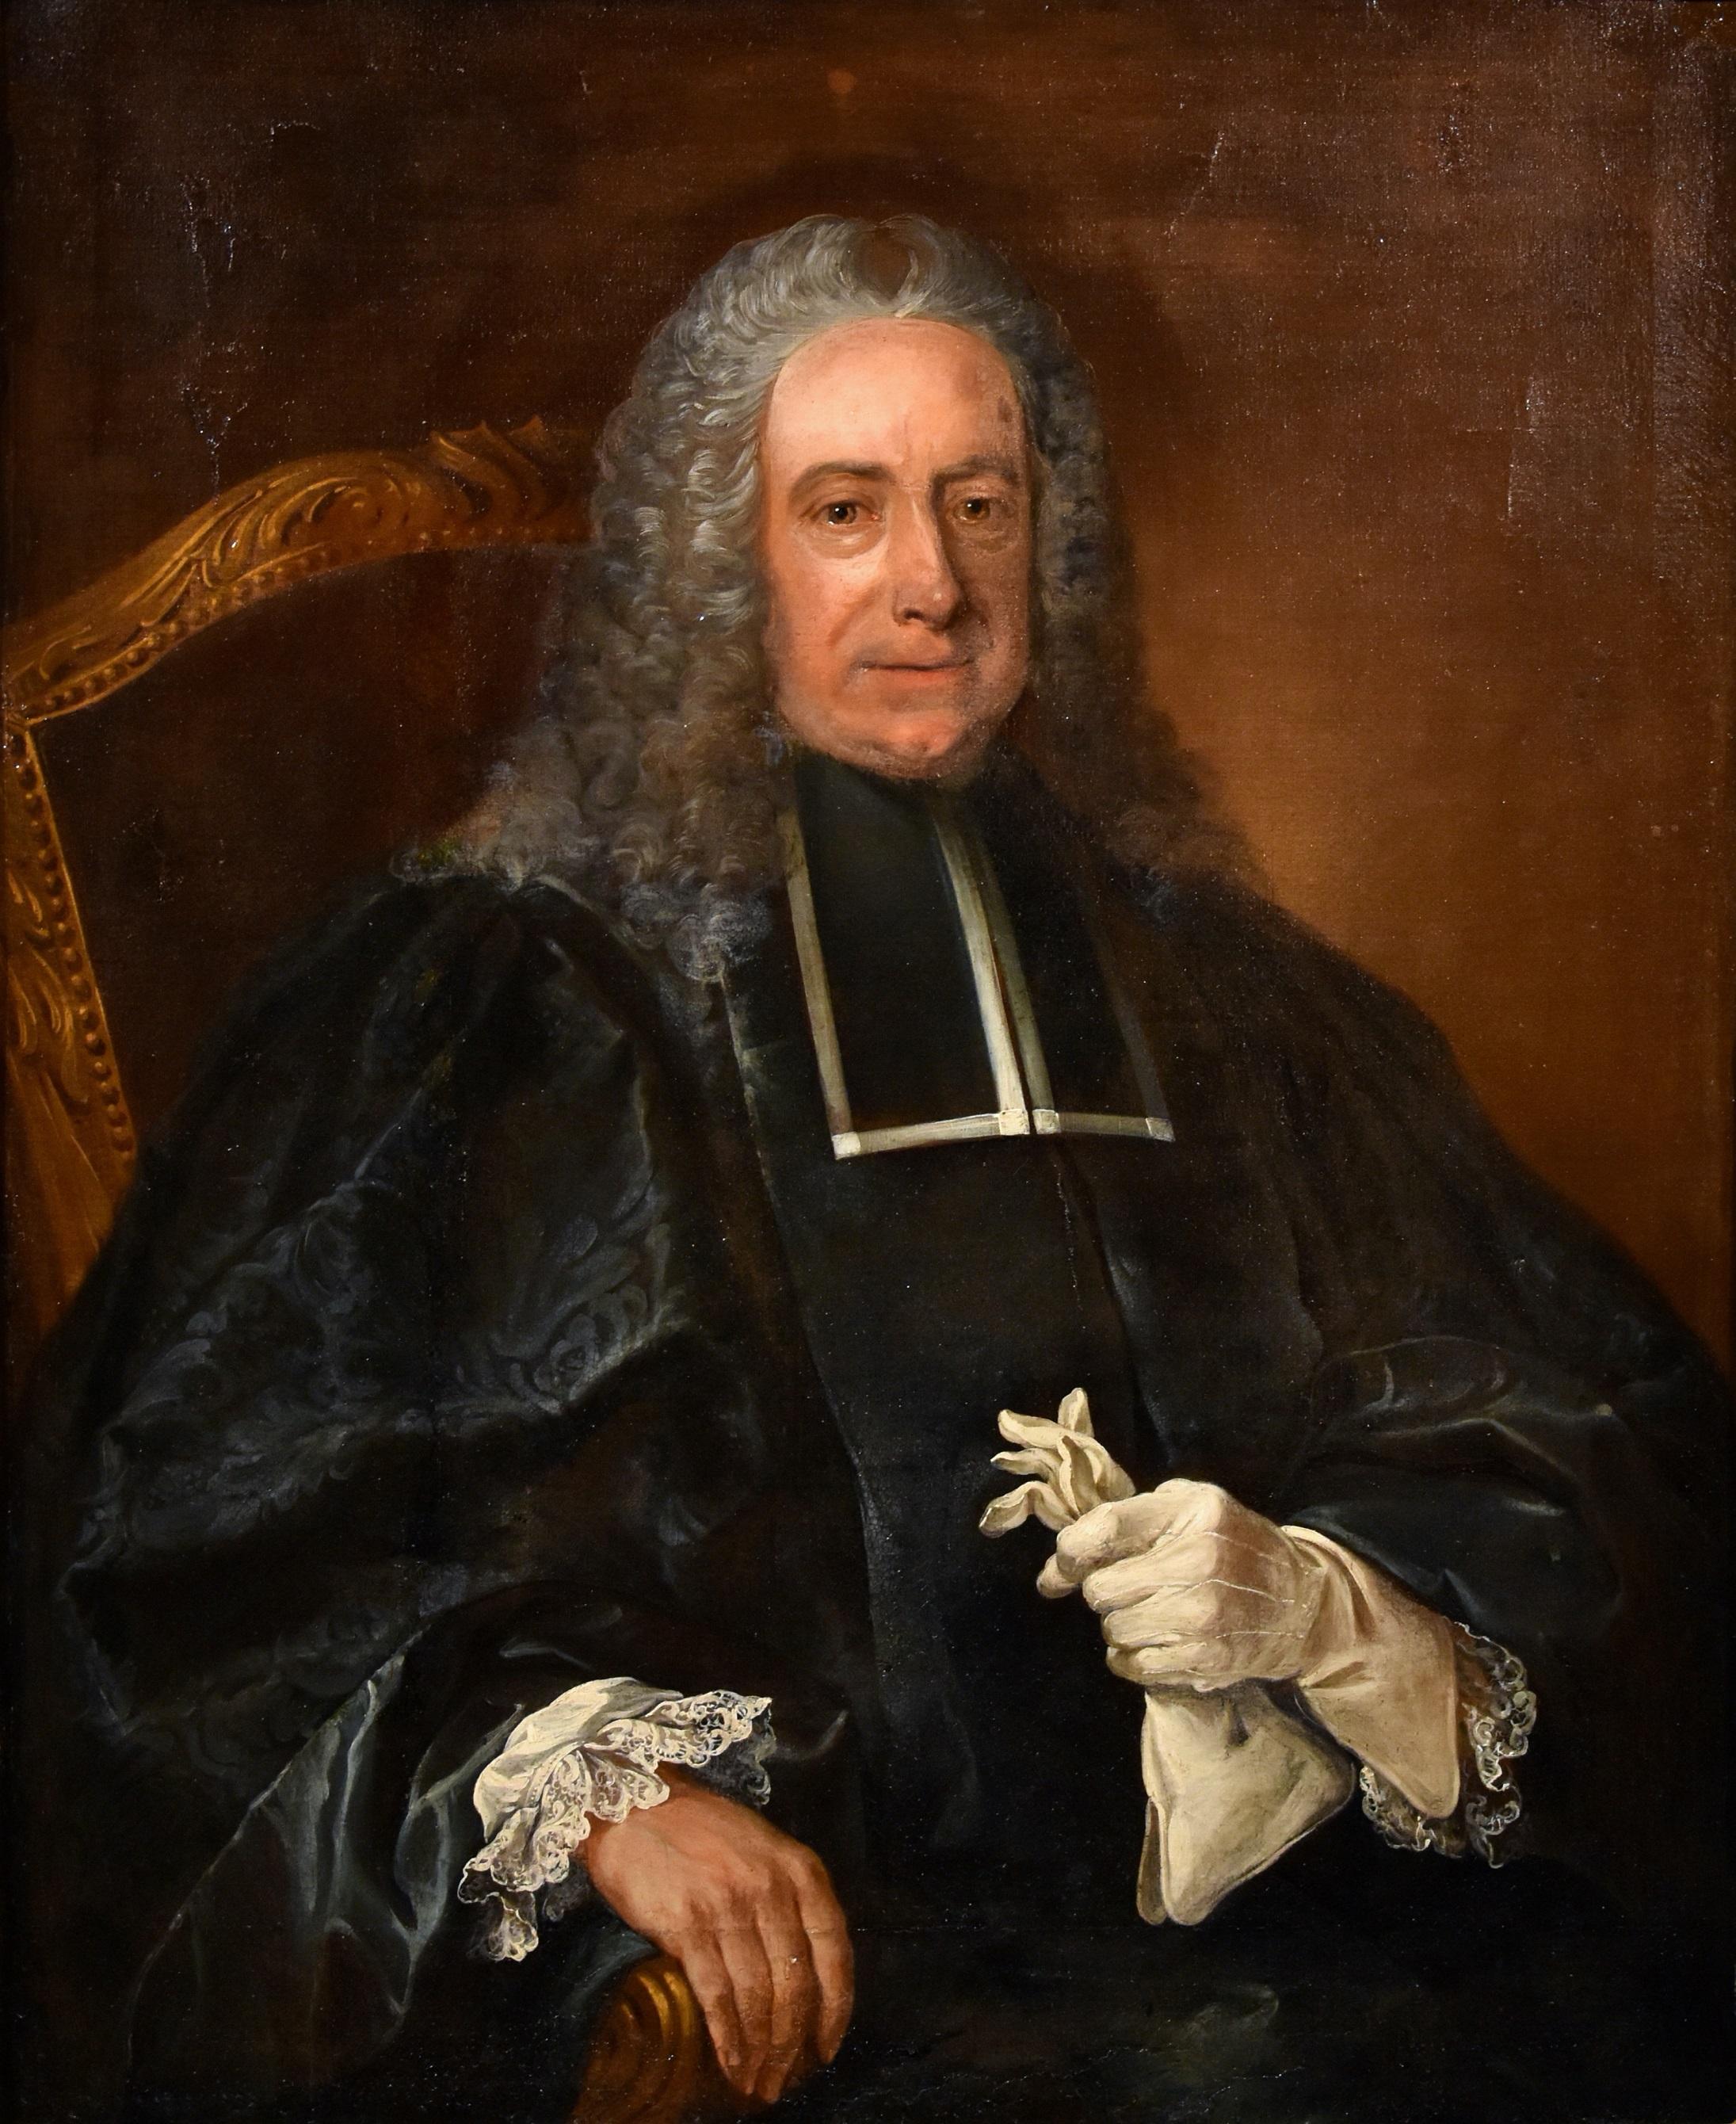 18th century French portrait painter - Attributed to Donatien Nonotte (Besançon 1708 - Lyon 1785)
Portrait of a lawyer

Oil on canvas
100 x 82 cm., In the frame cm. 131 x 111 cm.

The portrayed in this large painting is a man of the law, presumably